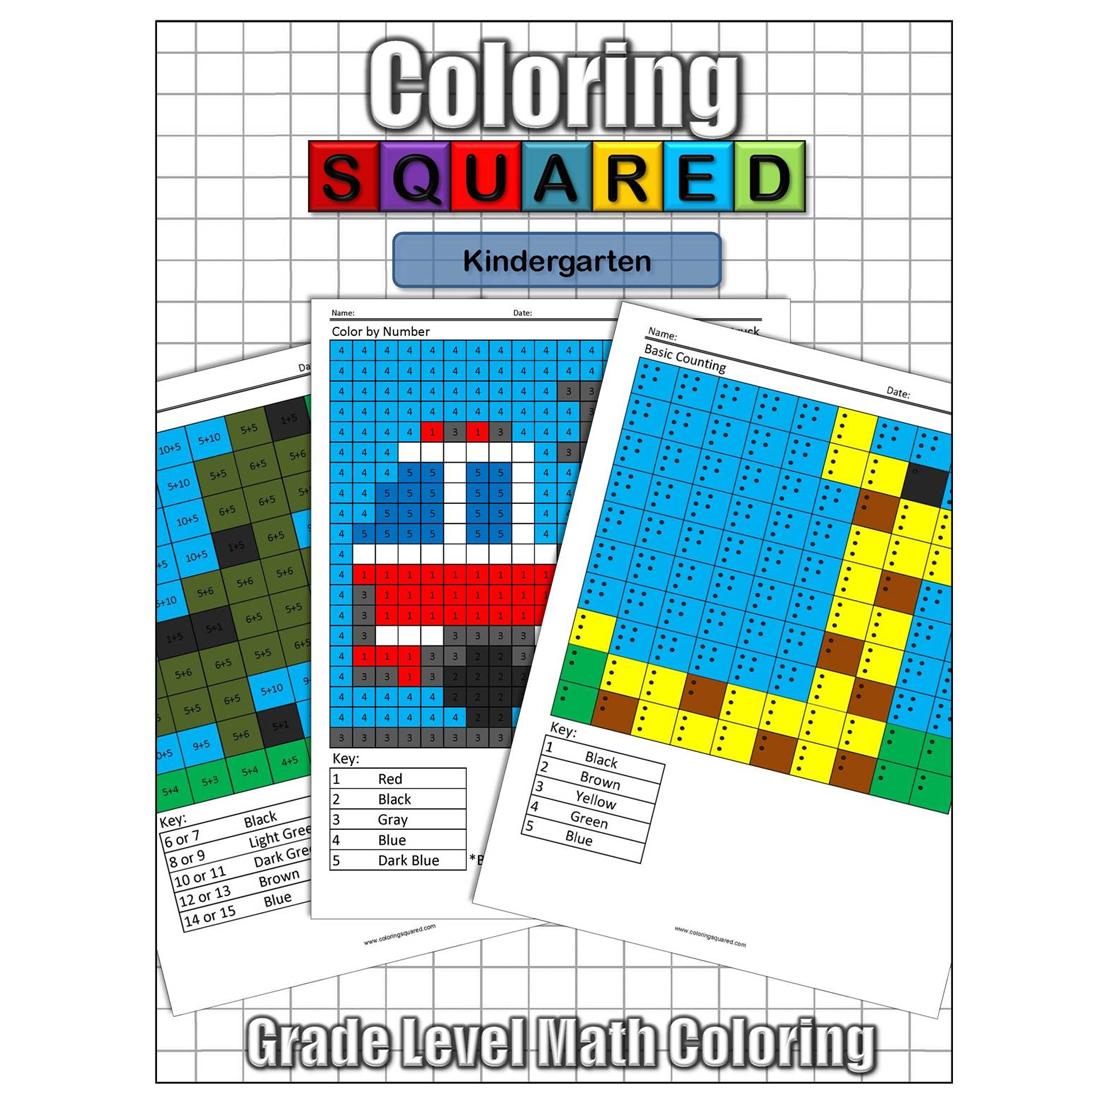 Coloring Squared Kindergarten Level Math Coloring Book